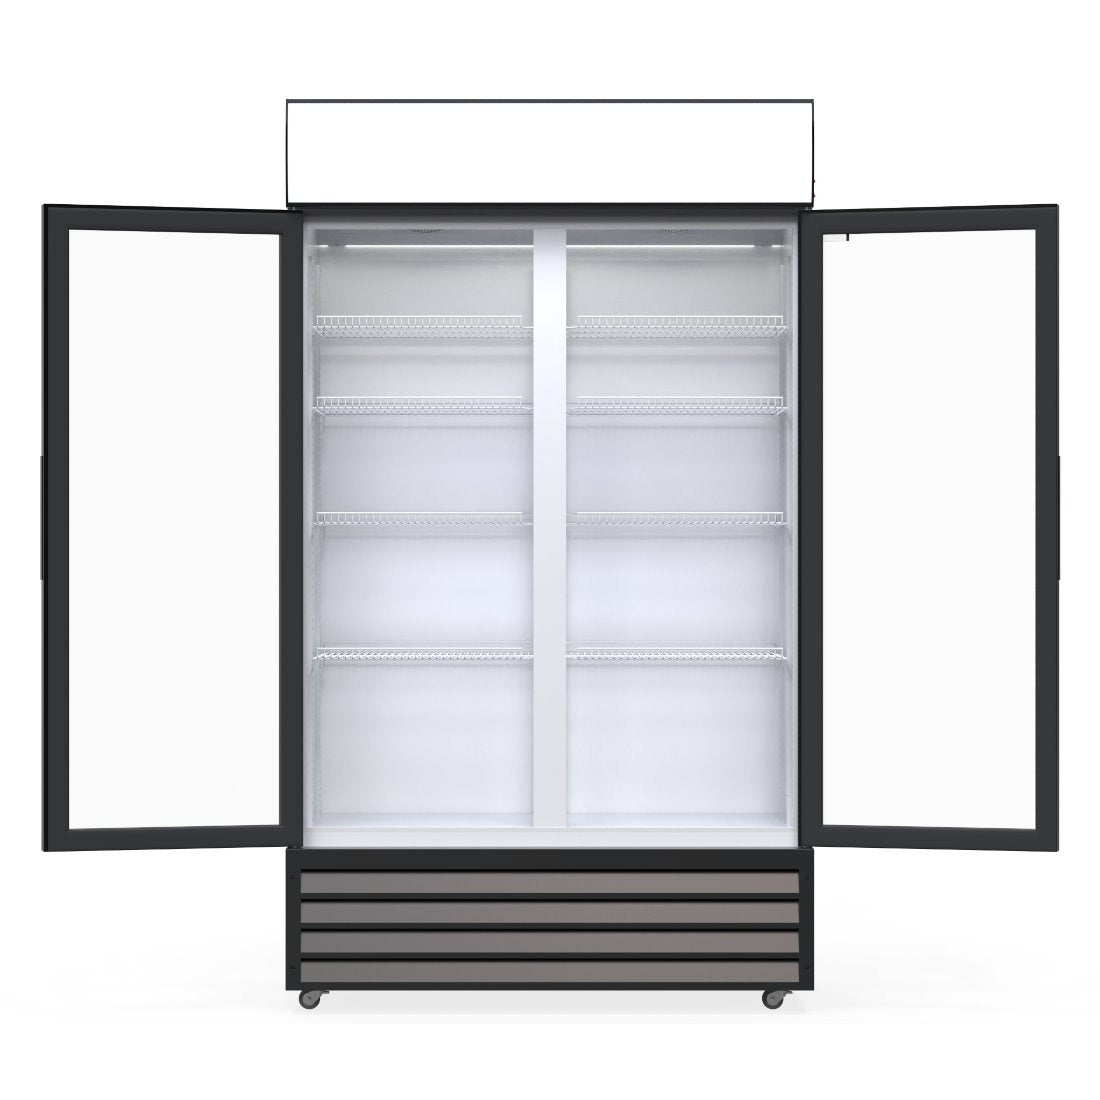 Empire Premium Double Hinged Door Display Cooler with Merchandising Canopy - SS-P688WB-A-EE Upright Double Glass Door Chillers Empire   